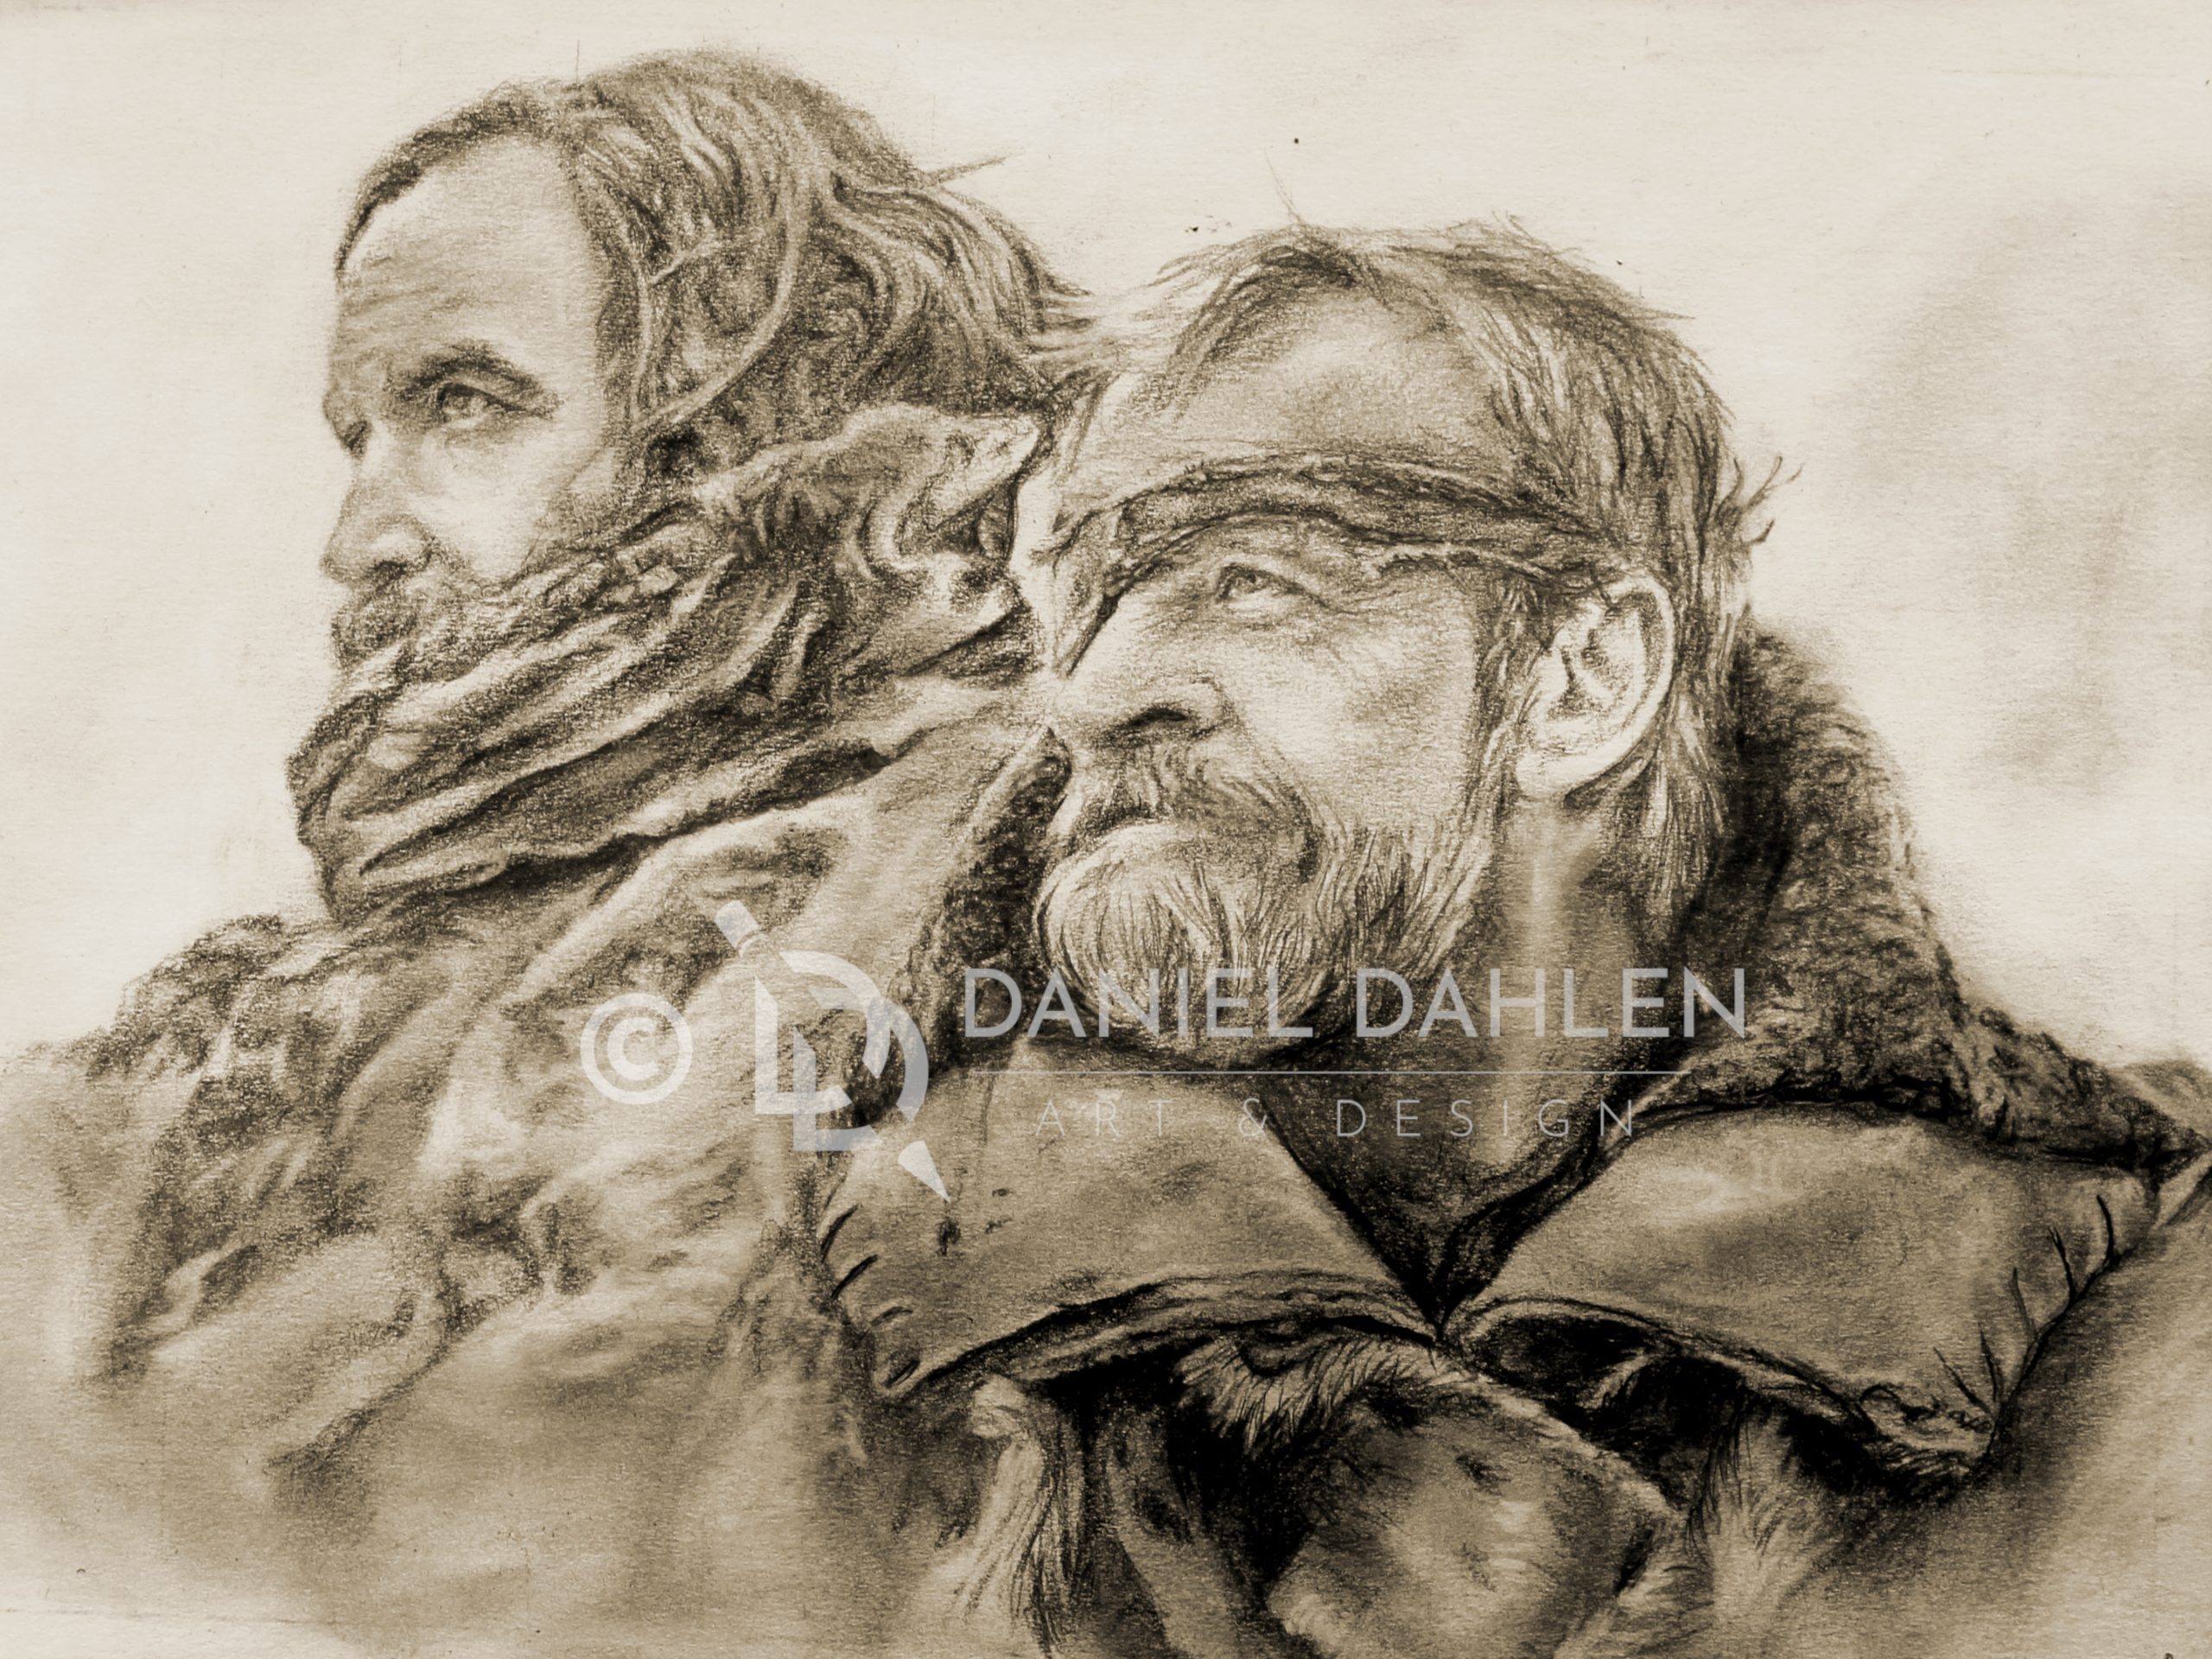 "The Hound & The Lightning Lord"